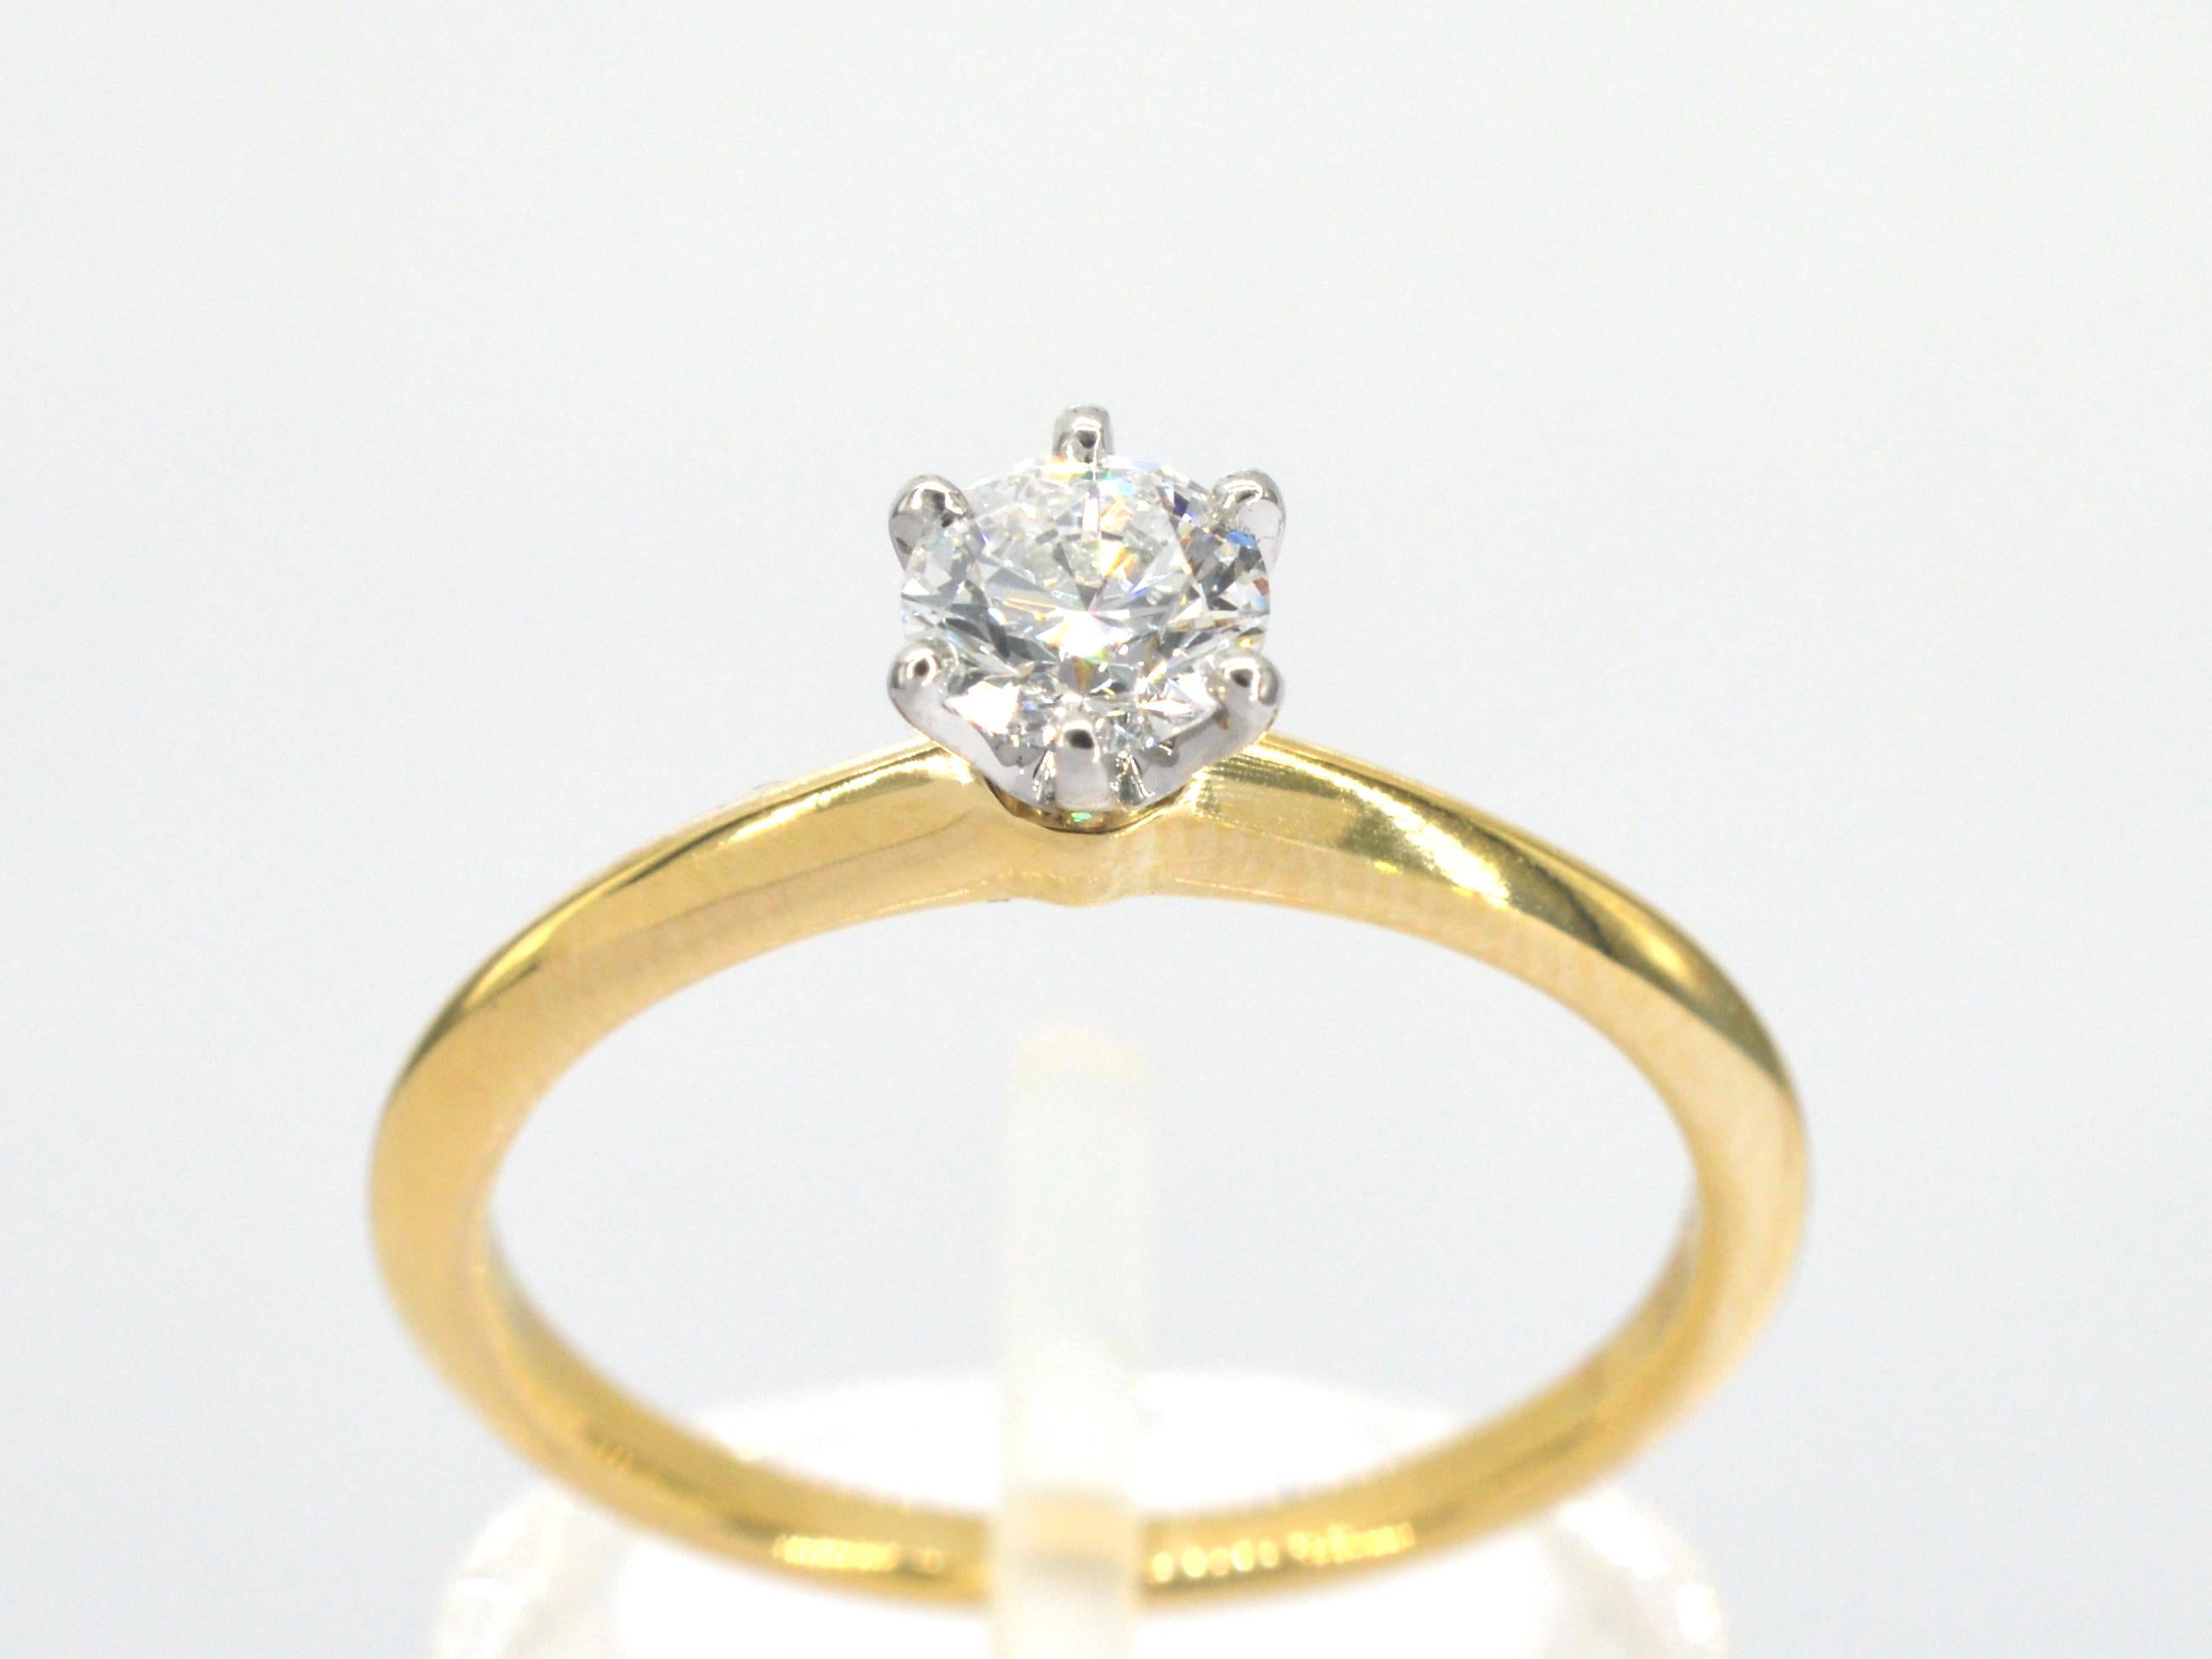 An exquisite Tiffany & Co. ring, known as 